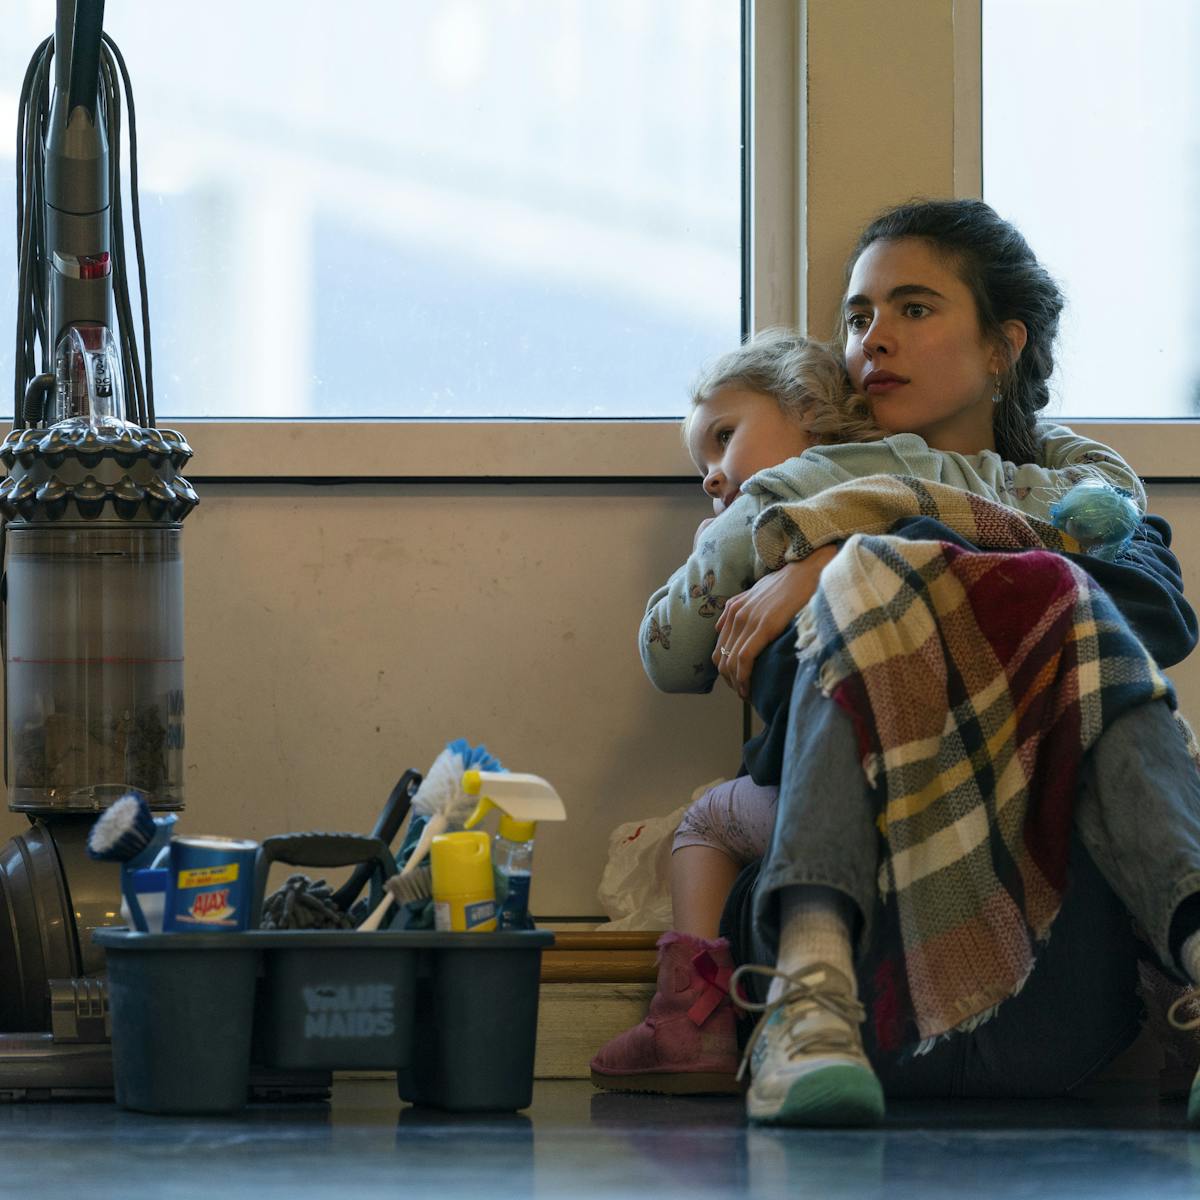 Alex Russell (Margaret Qualley) and Maddy (Rylea Nevaeh Whittet) sit amongst cleaning supplies on the floor of a starkly-lit room.